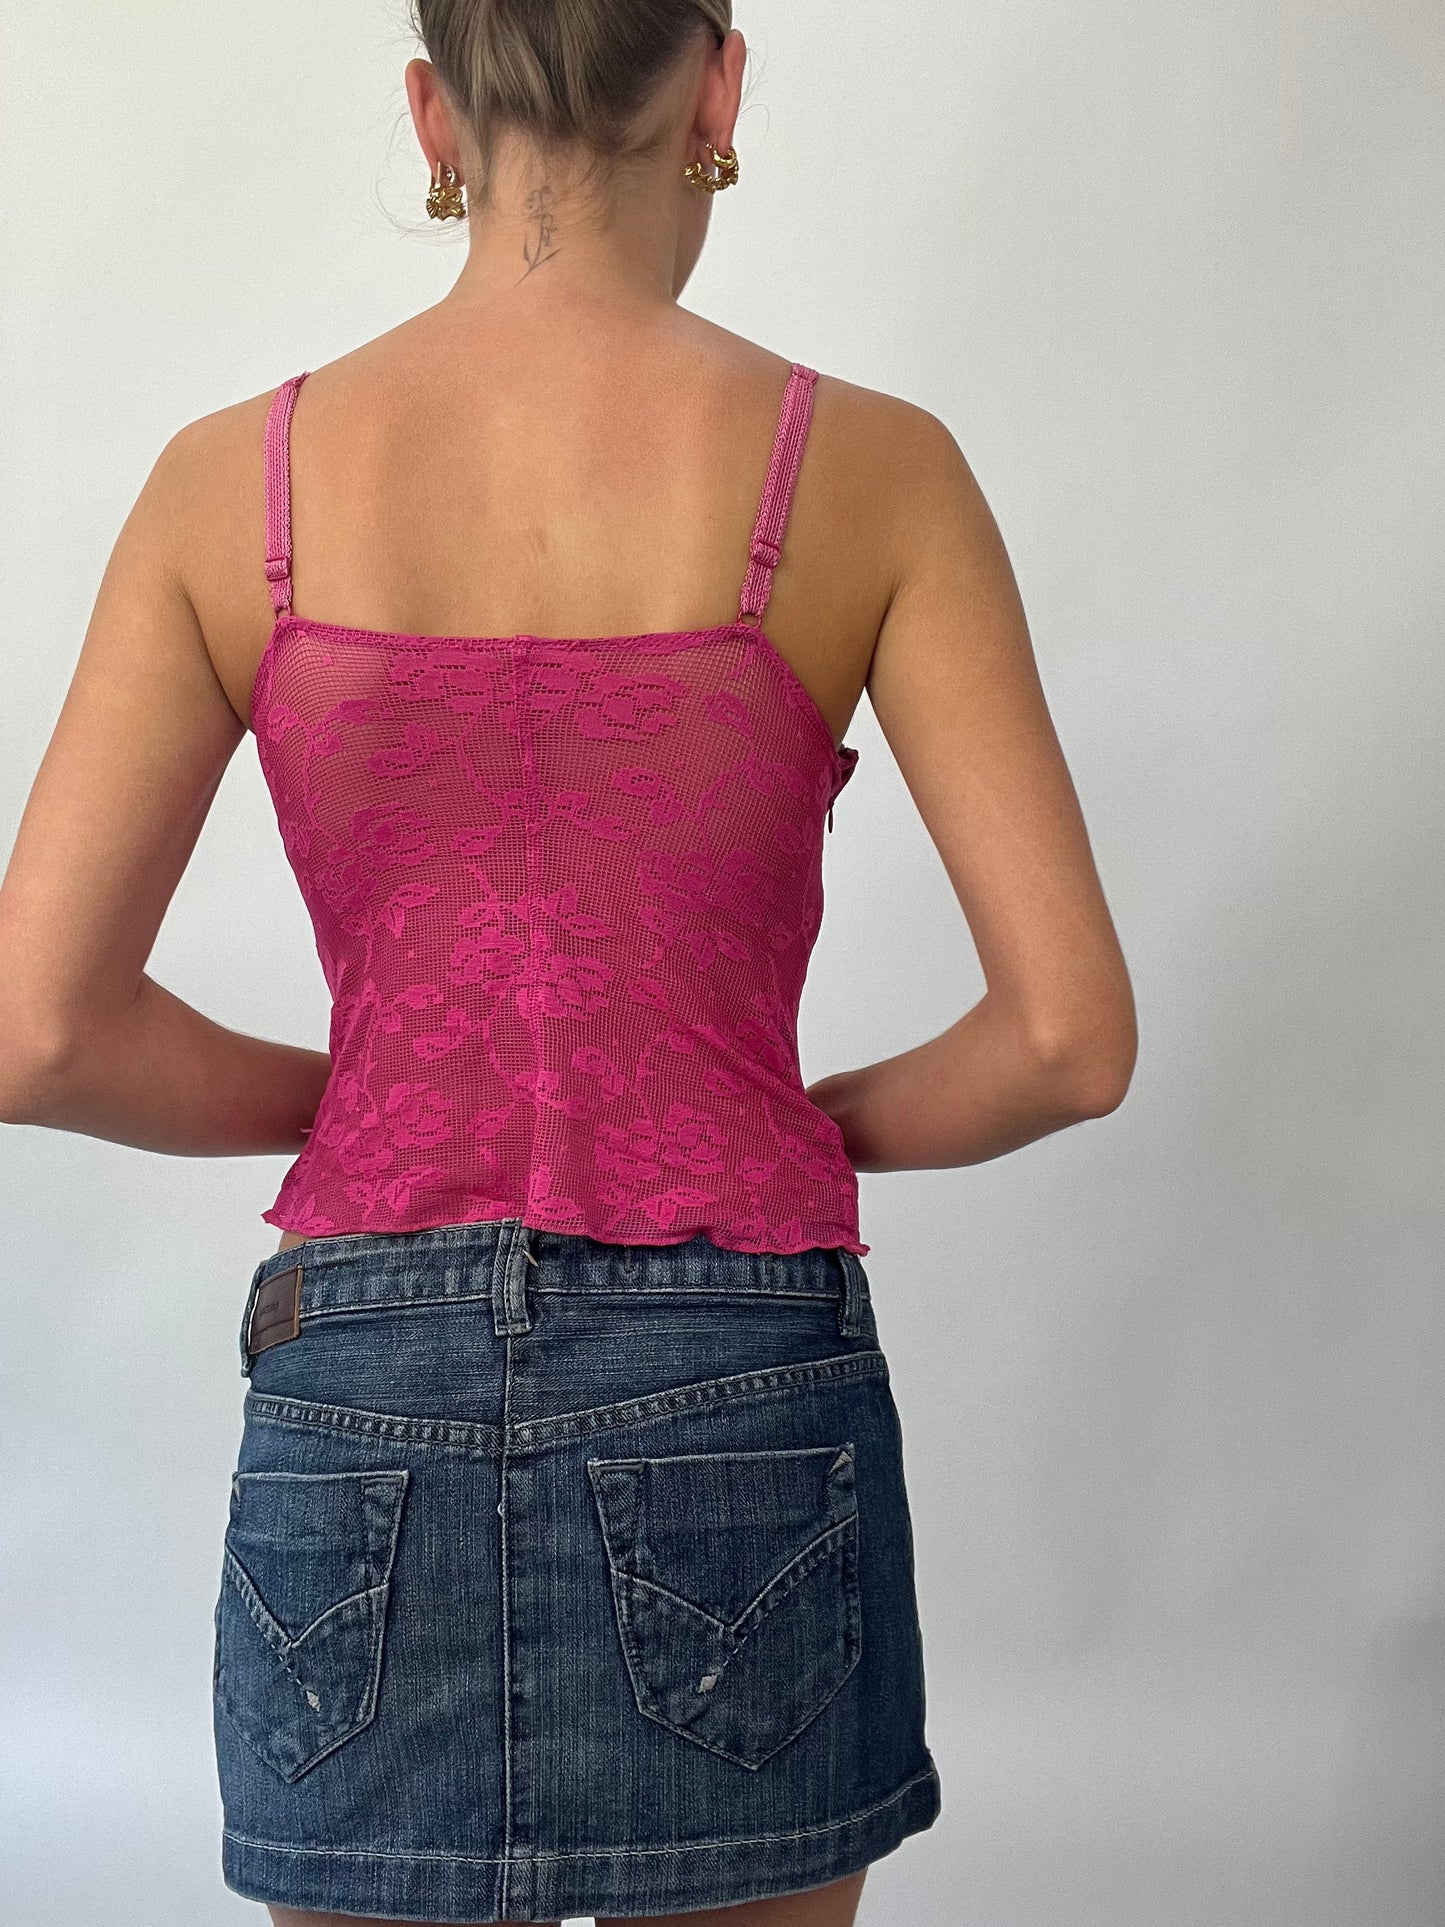 BRAT GIRL SUMMER DROP | small pink lace corset with floral mesh overlay